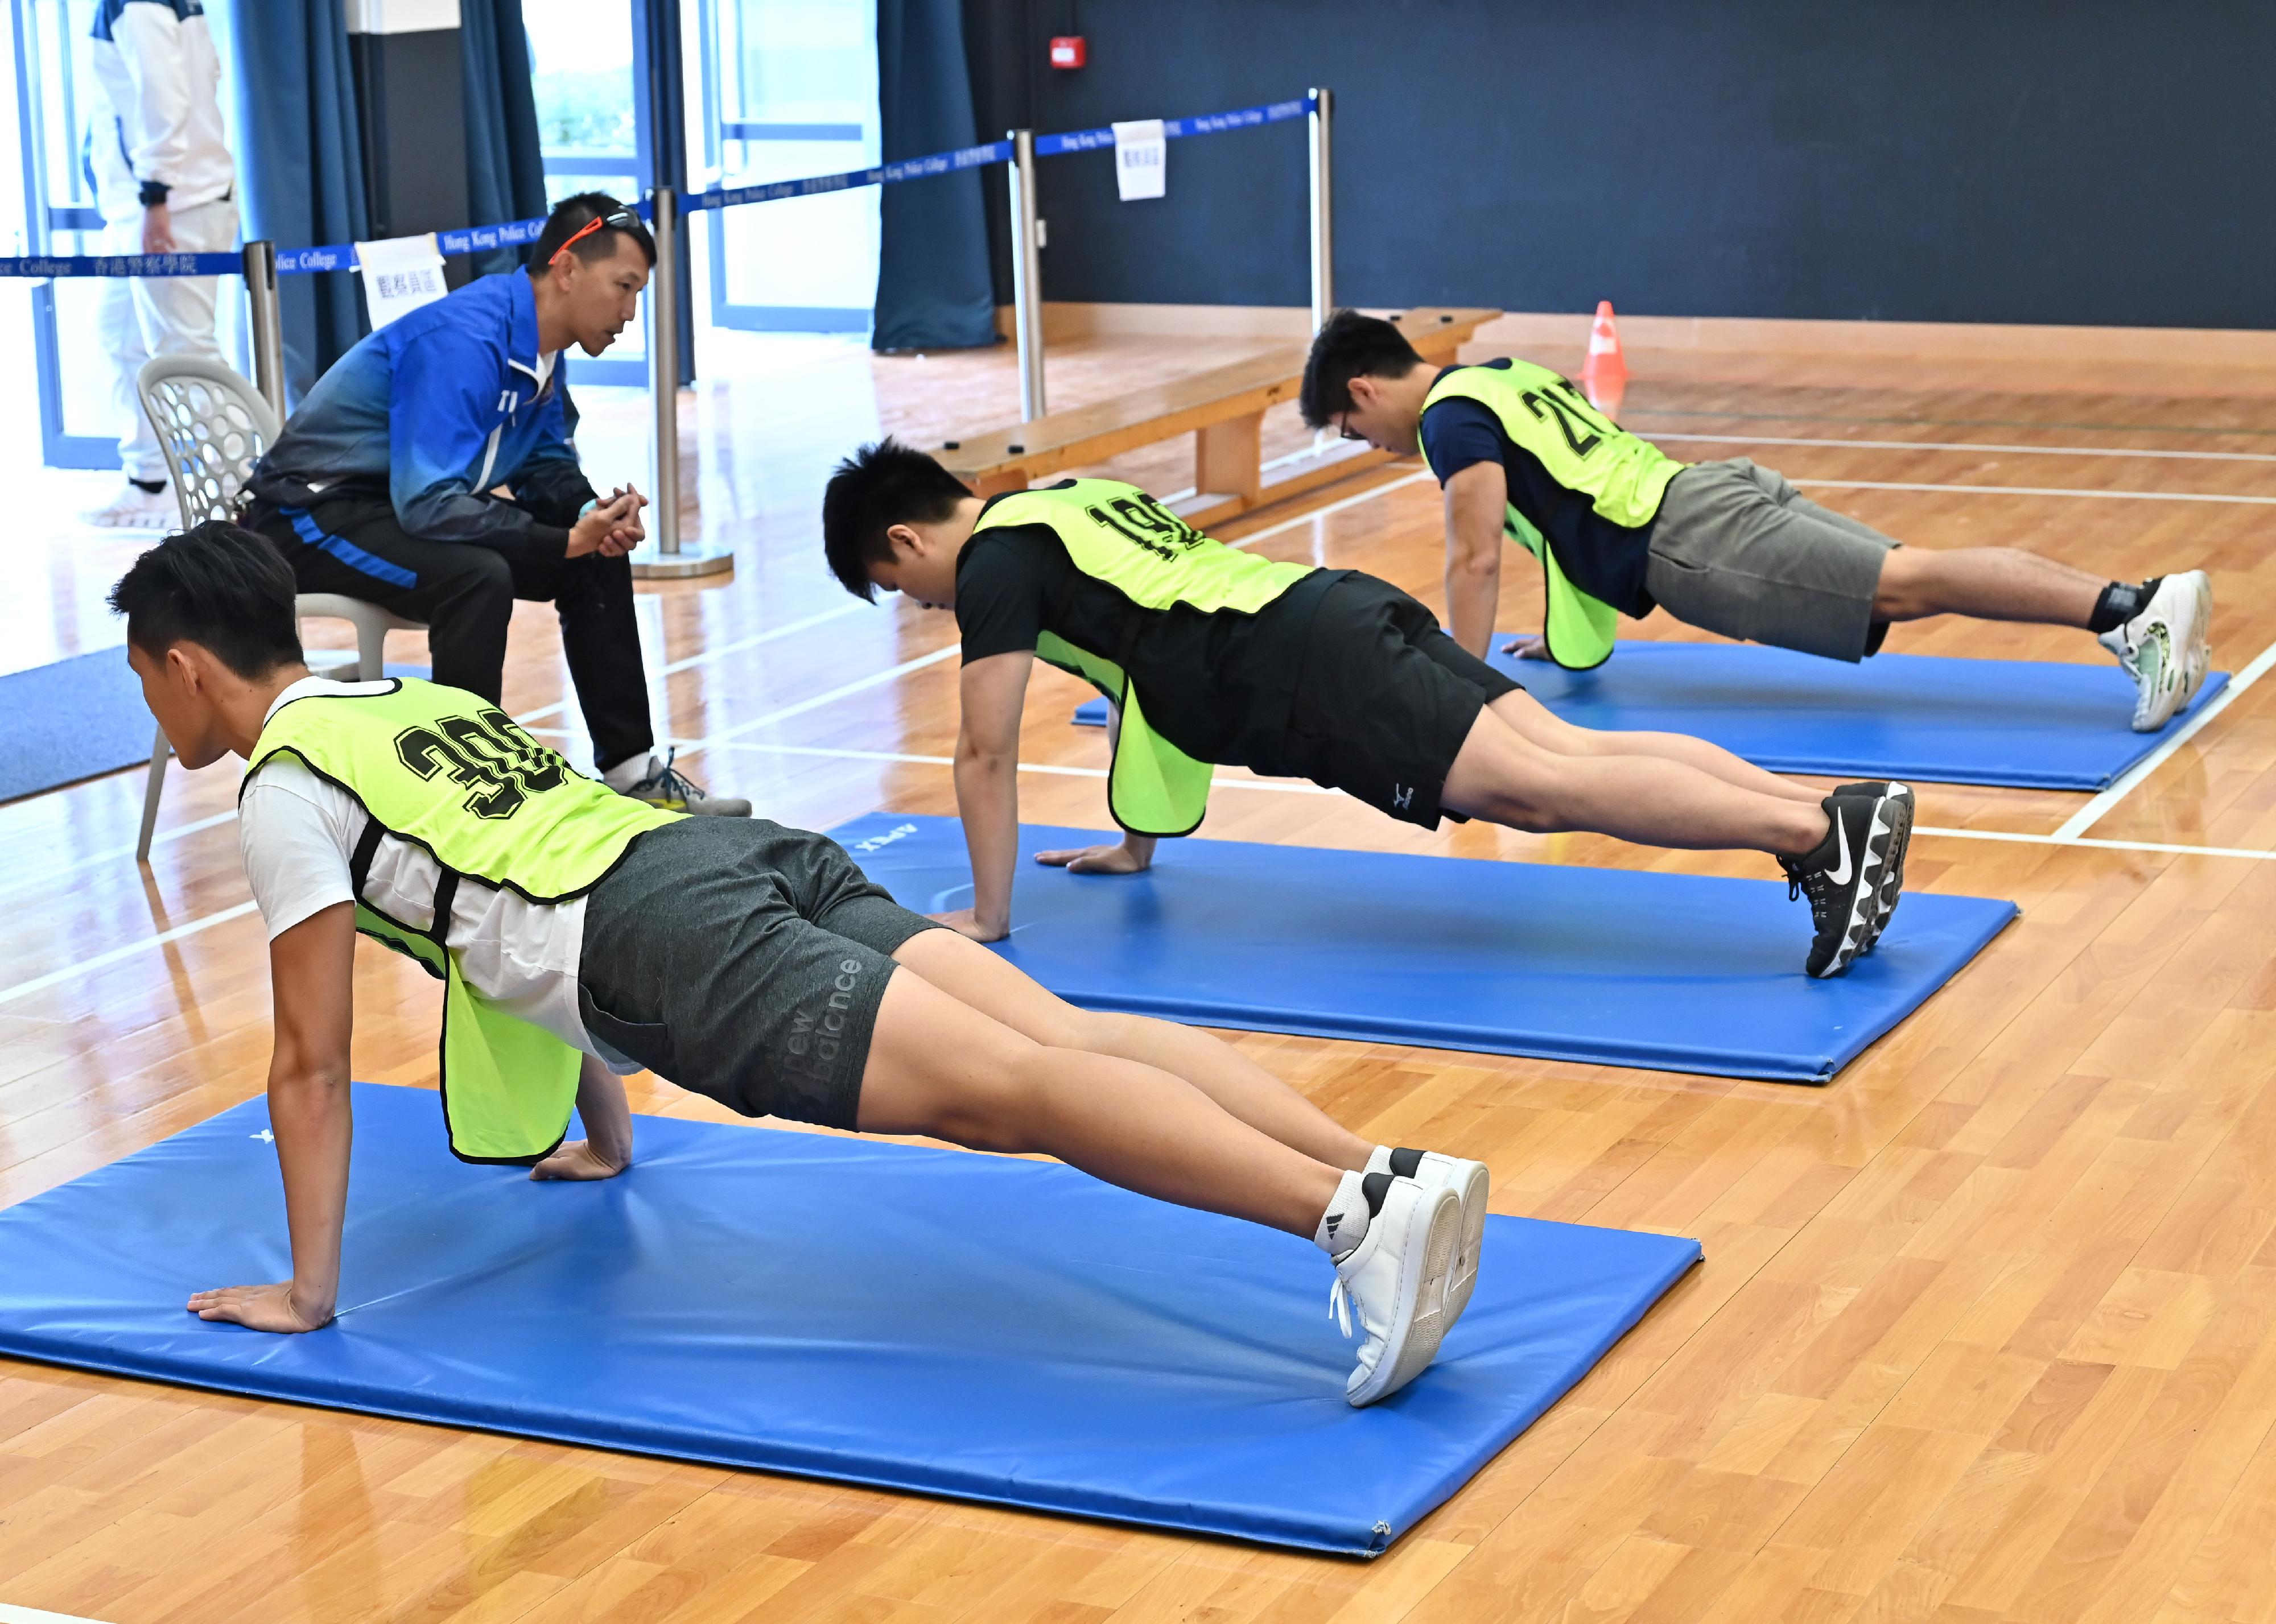 The Hong Kong Police Force today (December 17) held the Police Recruitment Experience and Assessment Day at the Hong Kong Police College. Photo shows participants taking part in the push-up challenge during the physical fitness test workshop.